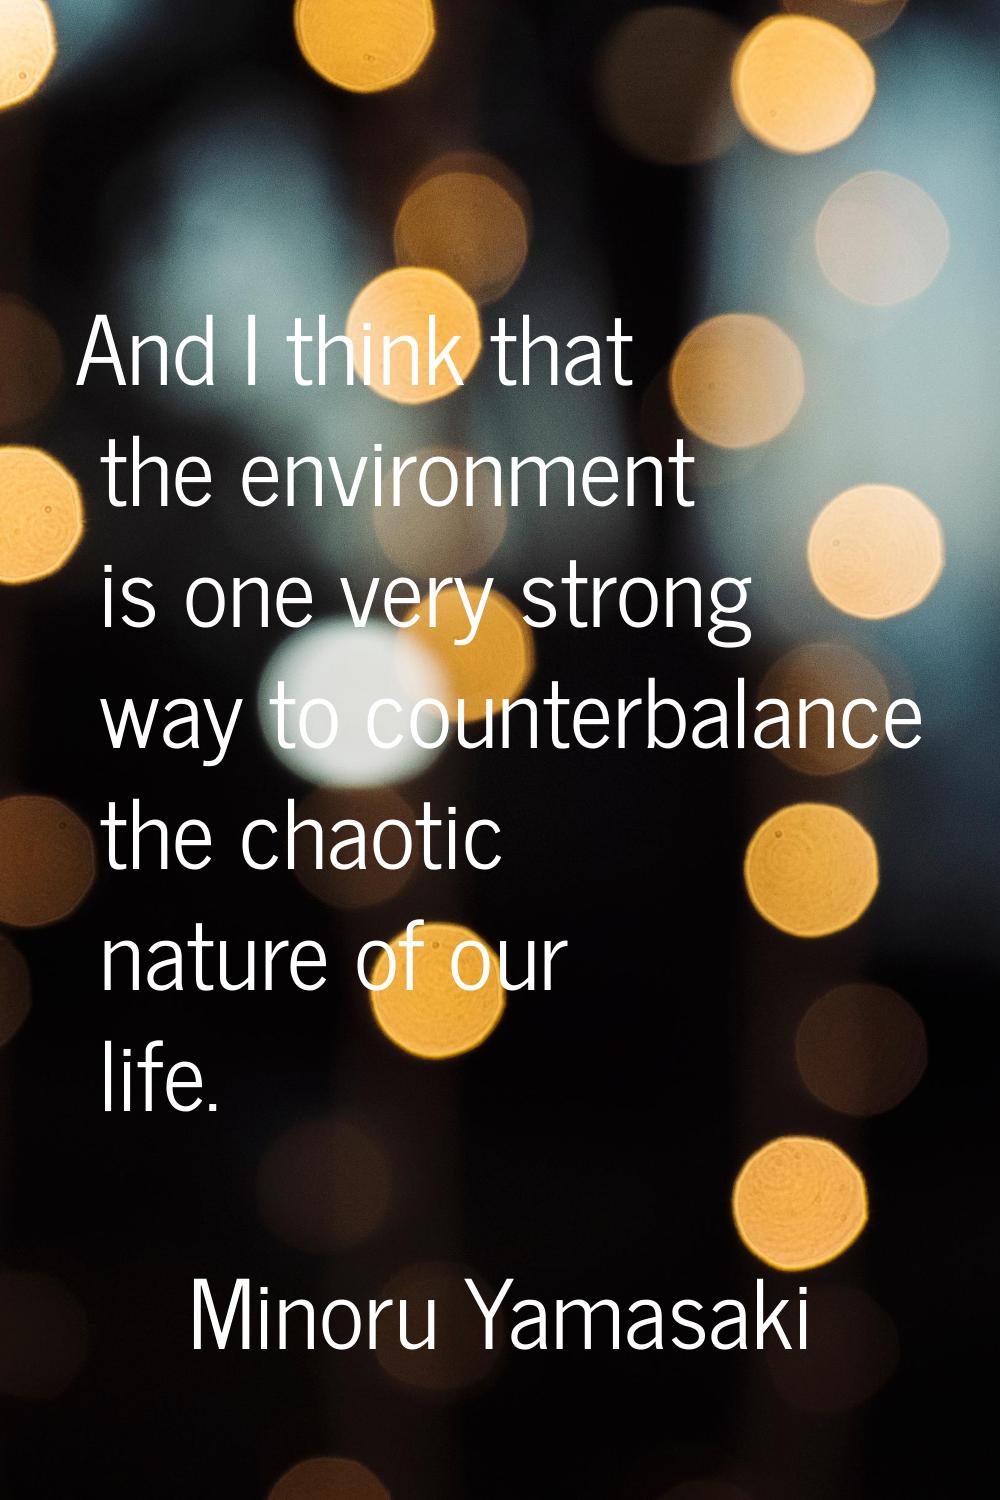 And I think that the environment is one very strong way to counterbalance the chaotic nature of our